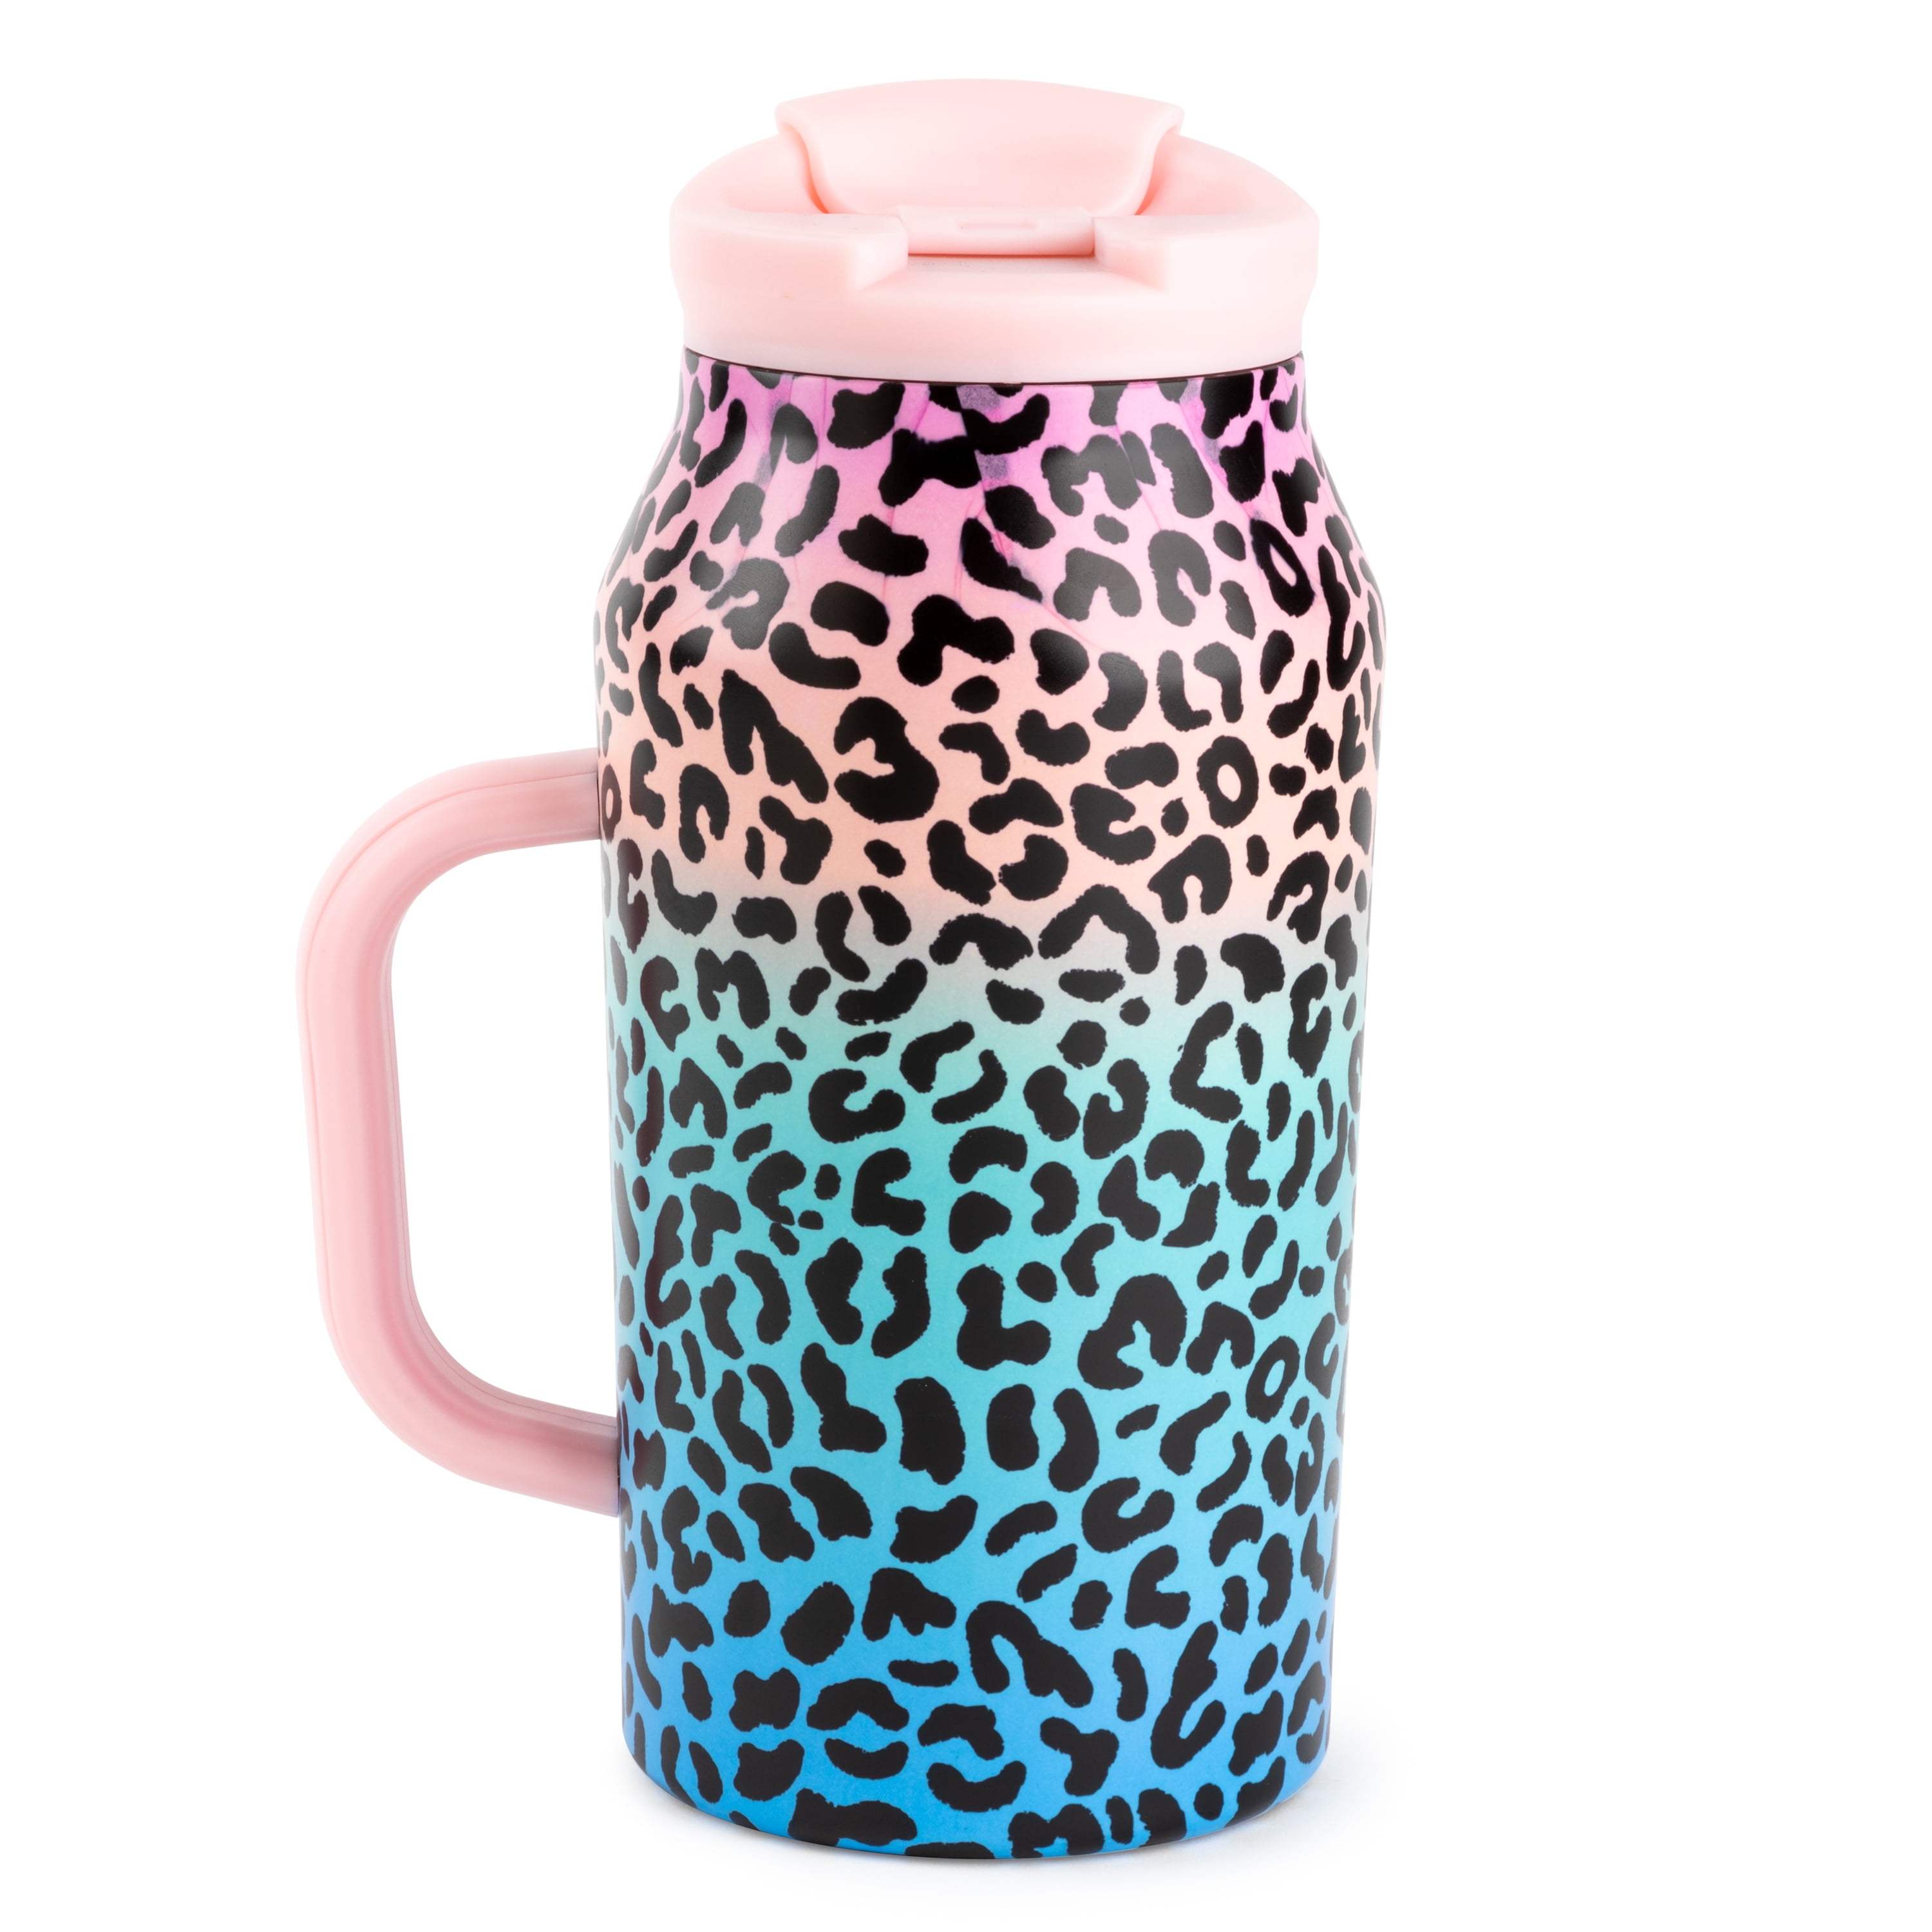 TAL Stainless Steel Basin Tumbler 40 fl oz Pink Leopard Double Wall  Insulated for Sale in Lancaster, CA - OfferUp